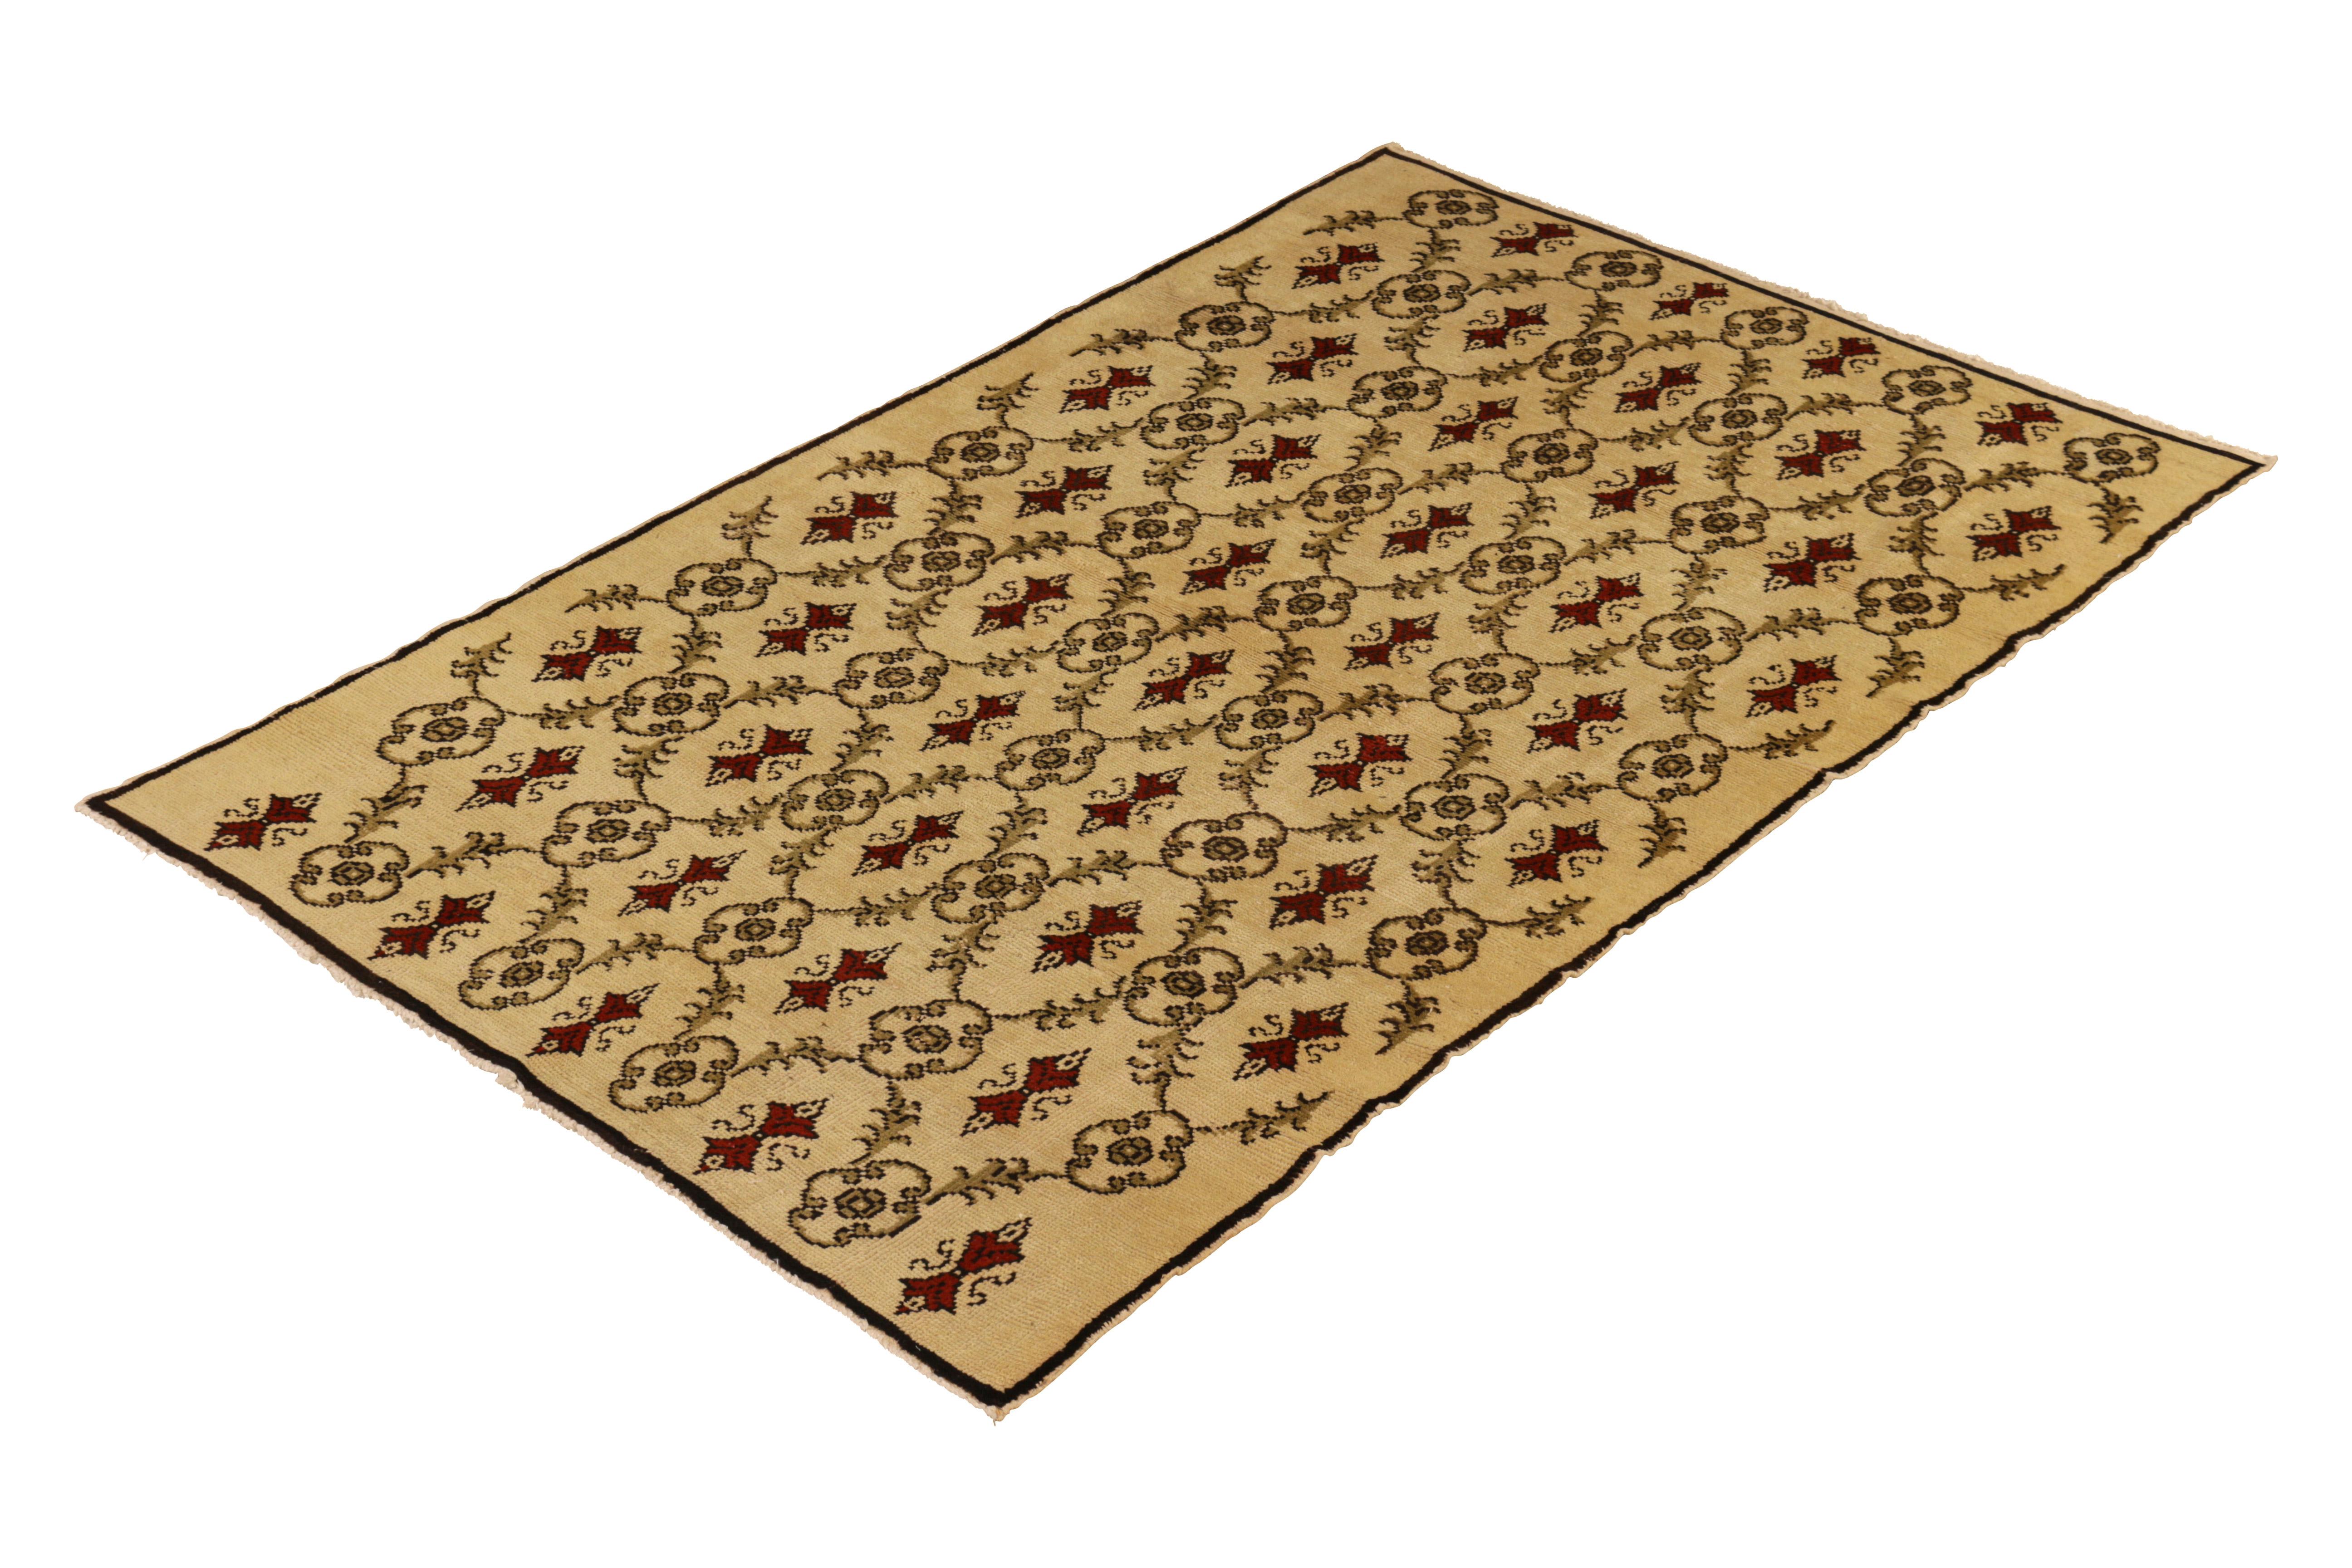 Hand knotted in wool originating from Turkey, this contemporary rug draws inspiration from the Anatolian Sparta rug designs of the 1930s and onward, capturing the play of Turkish and European sensibility marrying some of the most beloved design